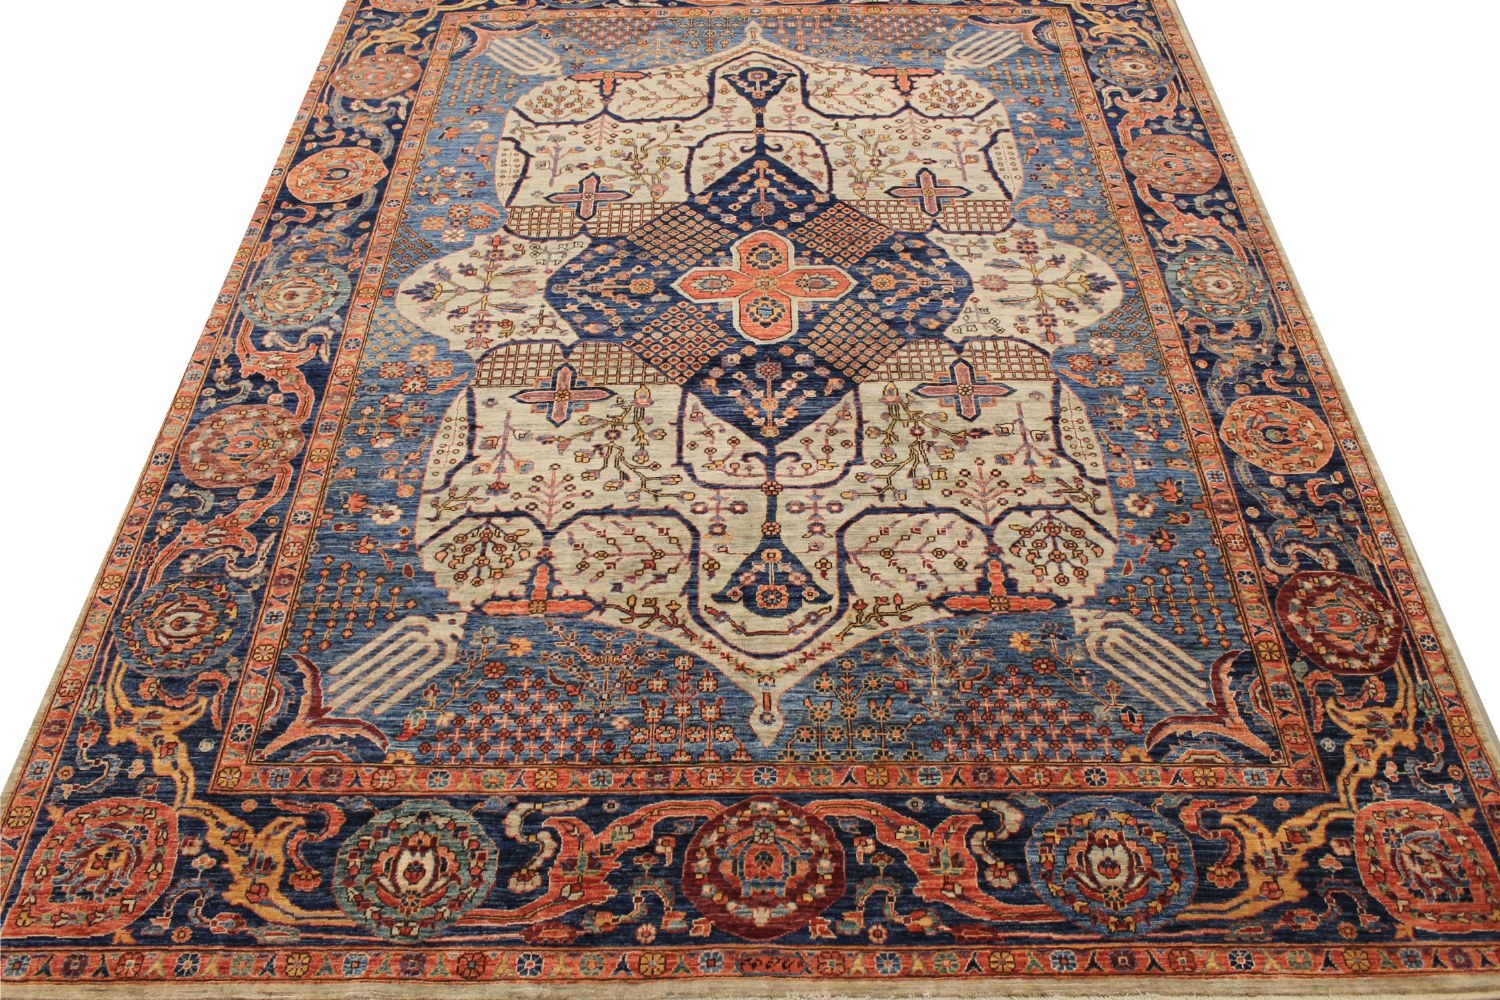 9x12 Aryana & Antique Revivals Hand Knotted Wool Area Rug - MR028854